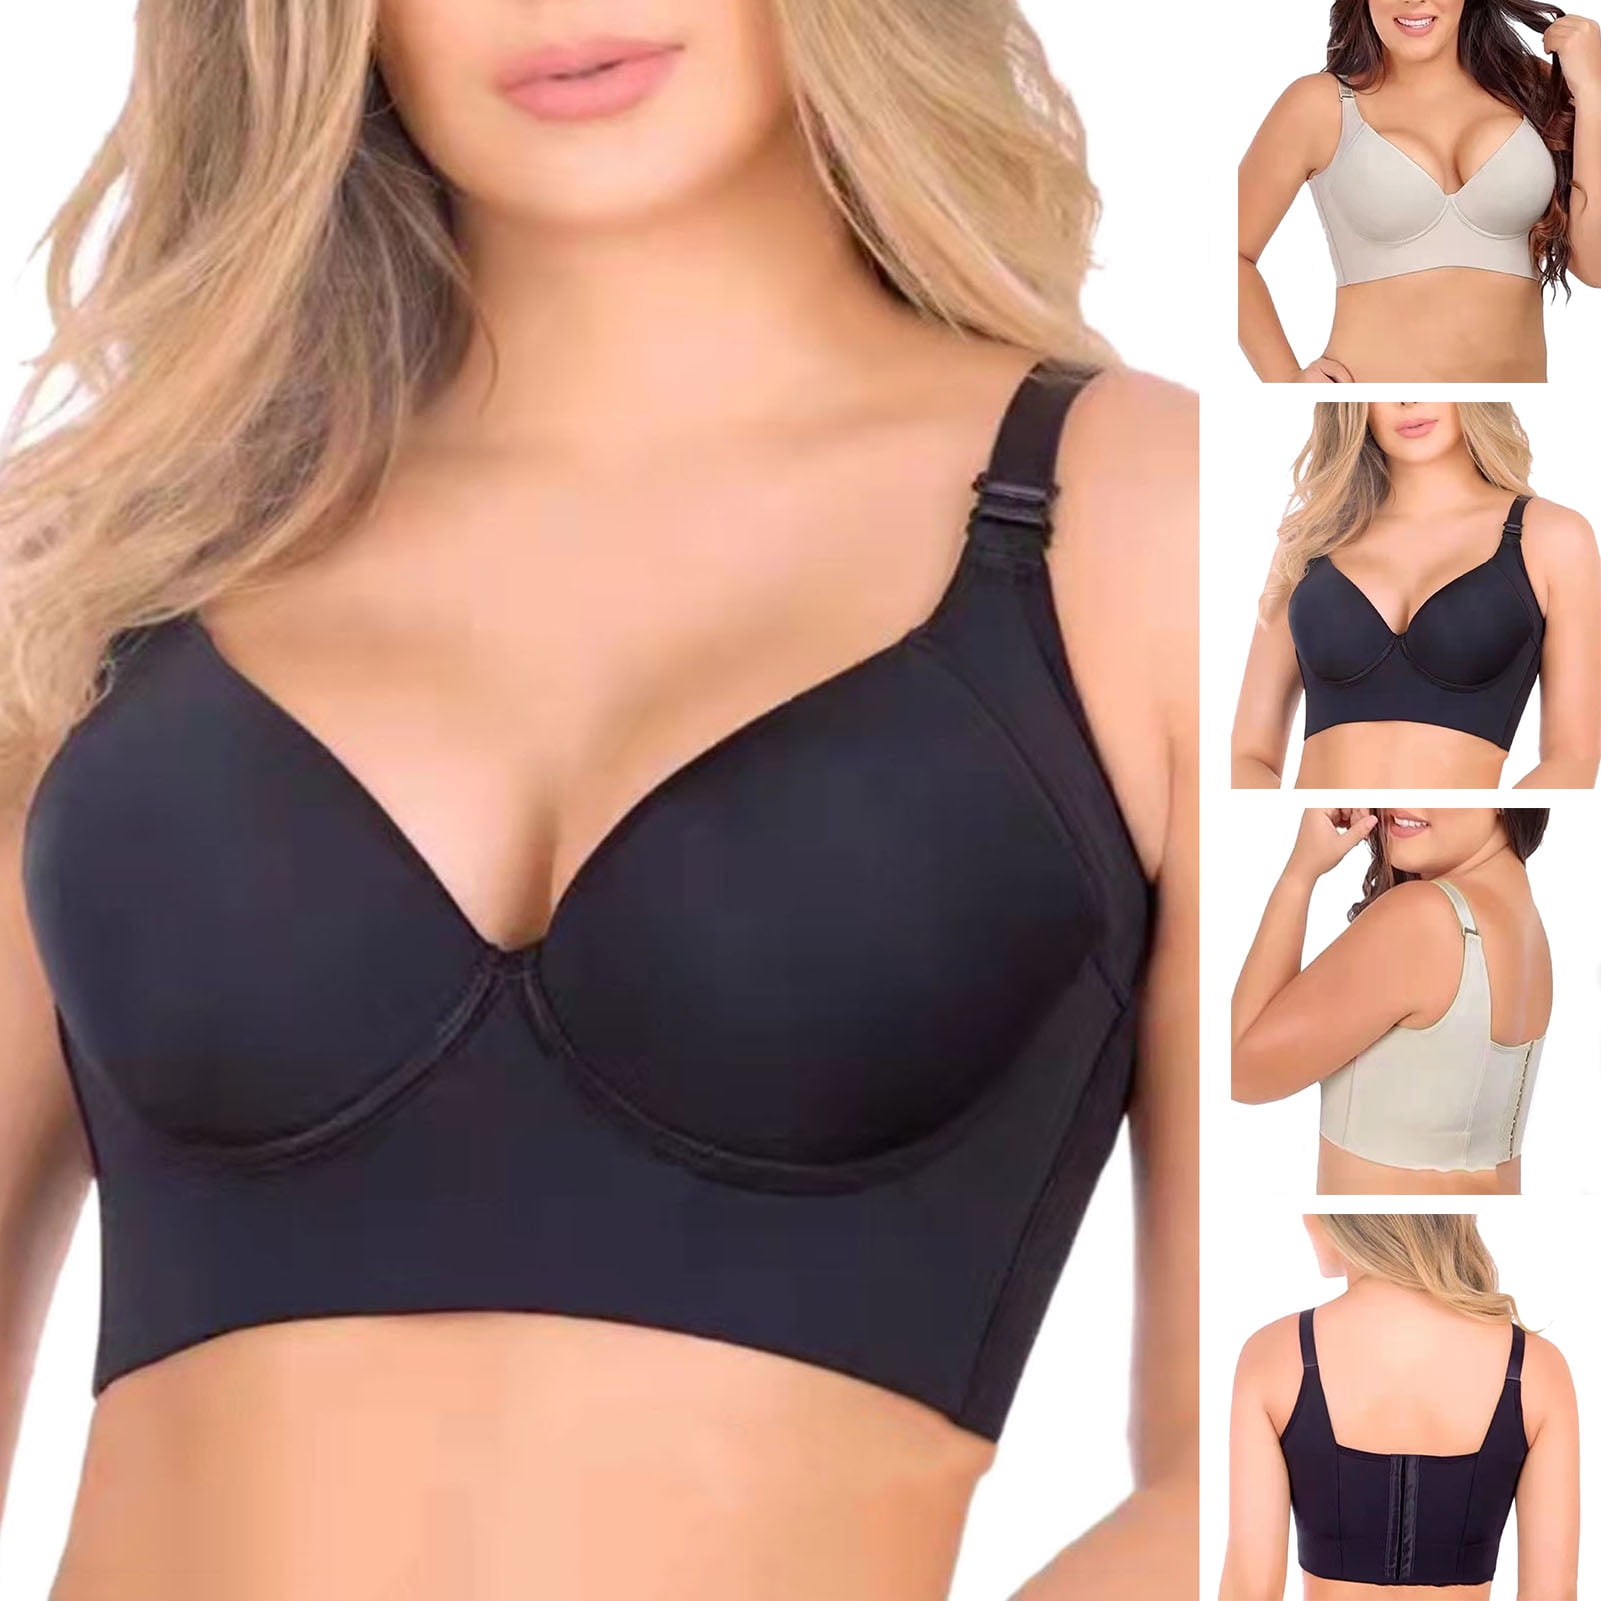 Bras To Wear With Dresses